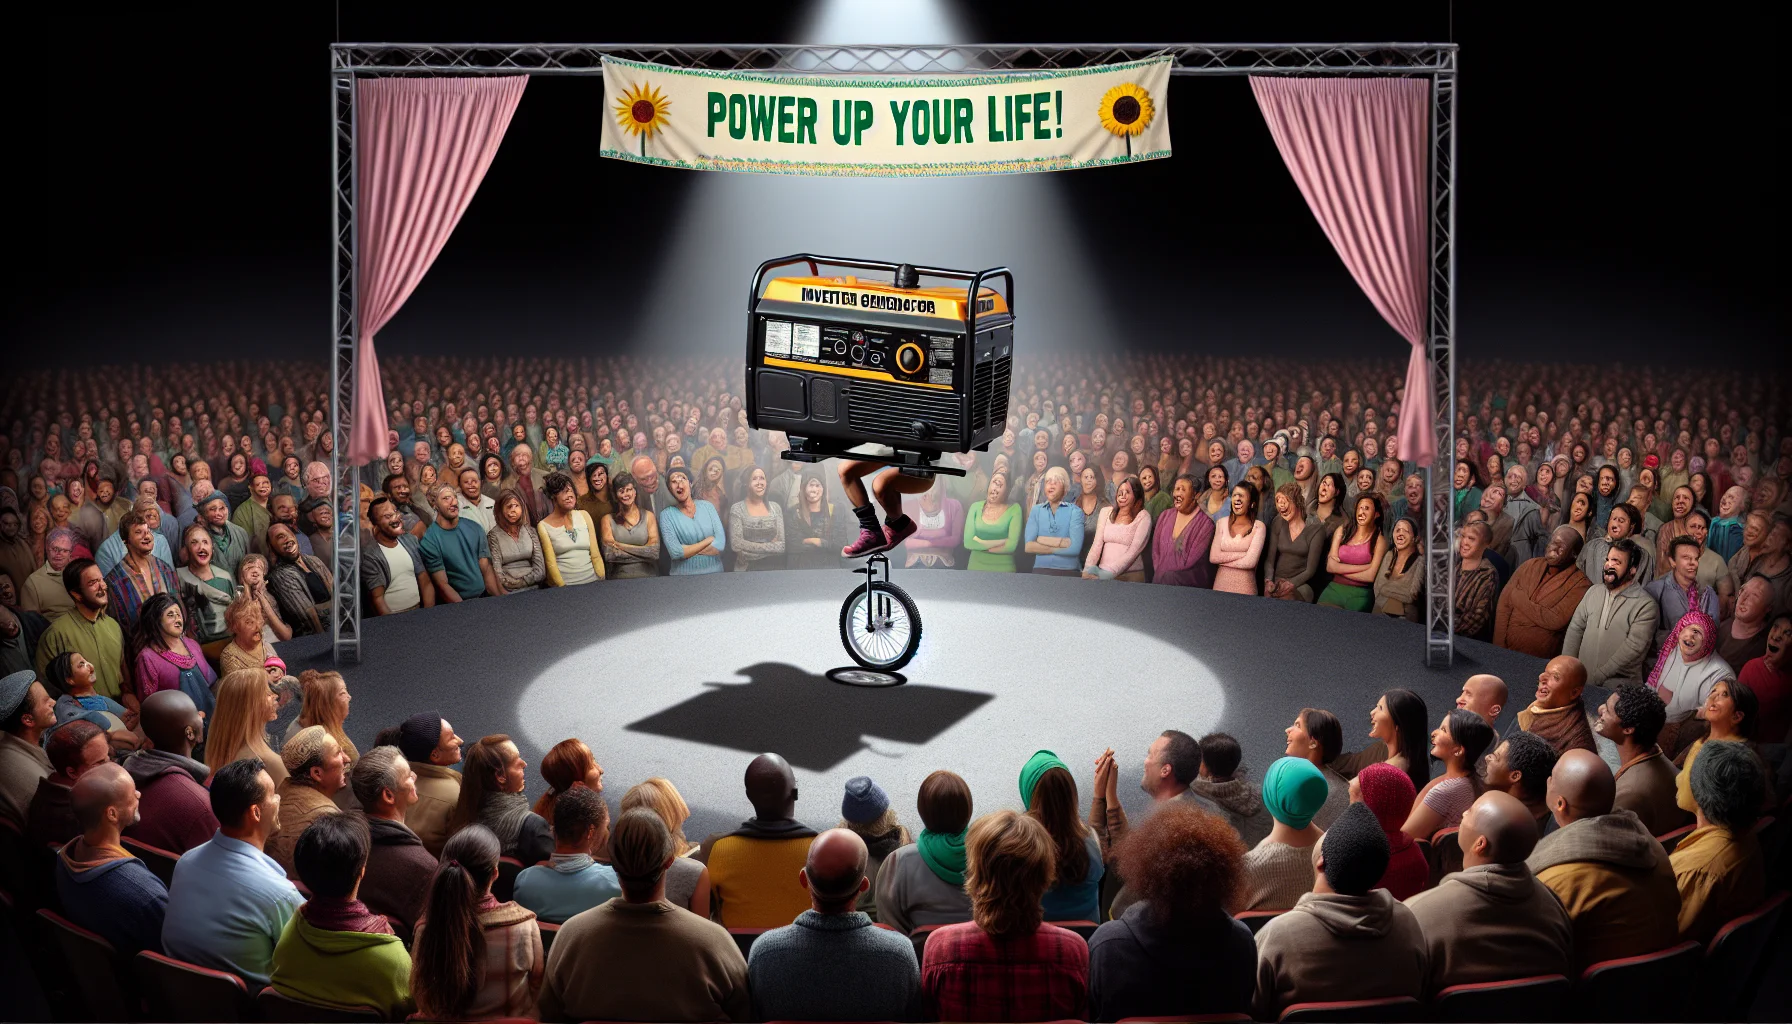 Create a playful and intriguing image of an inverter generator, resembling those found at big-box retail stores, in a comical setup encouraging individuals to generate their own electricity. Picture this: the generator is on stage, under a spotlight, doing a balancing act on a unicycle. In the audience, an array of people of different descents and genders, including Caucasian men, Black women, Hispanic men, Middle-Eastern women, and South Asian individuals, express surprise and amusement. A charming banner hangs over the stage, reading 'Power Up Your Life!' to inspire the idea of self-generation of power.